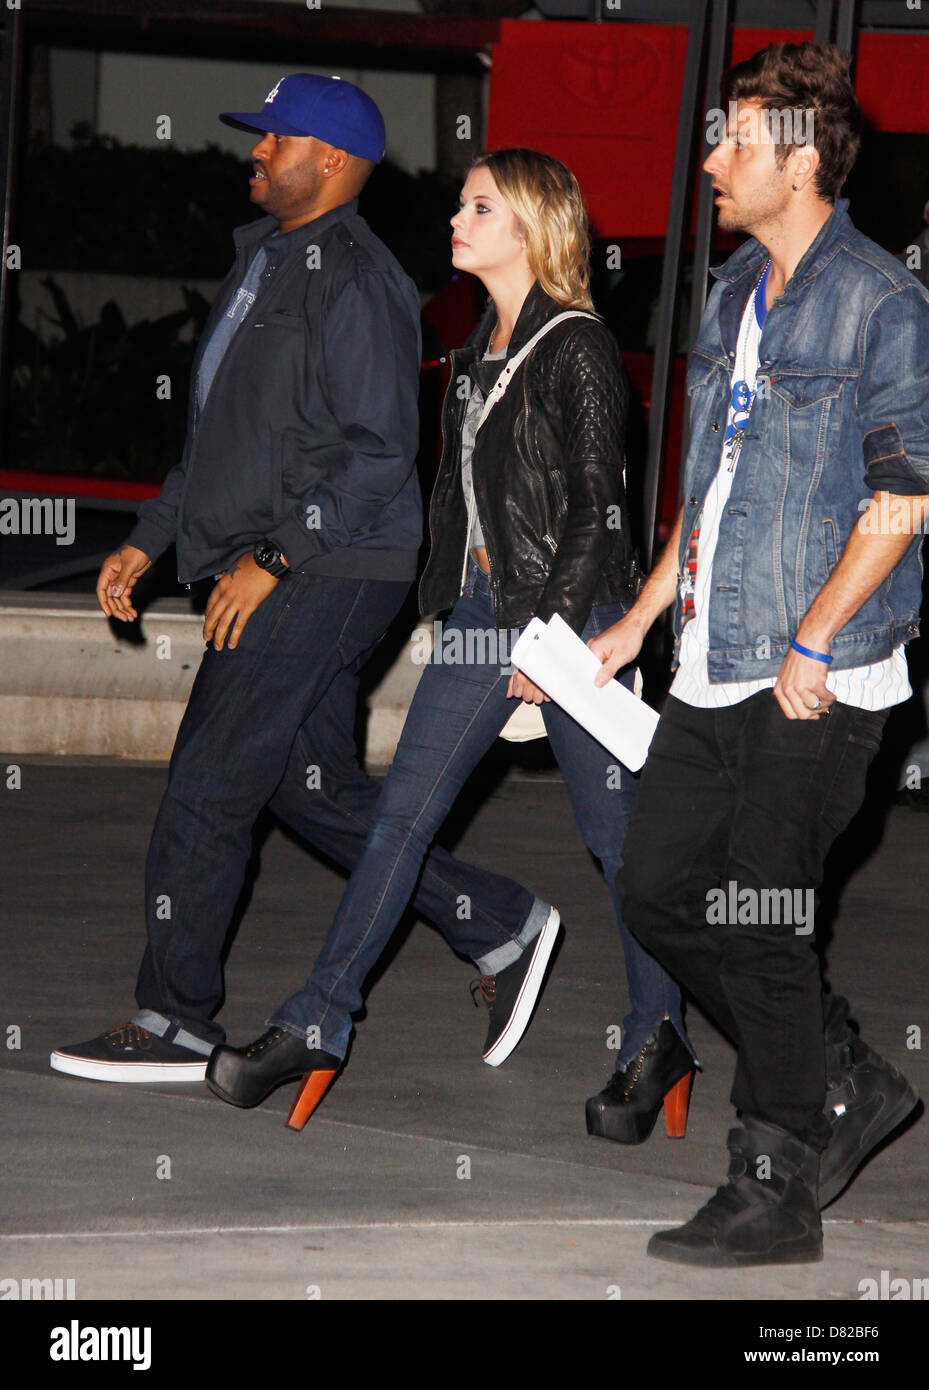 Ashley Benson and Ryan Good arriving at the Staples Center for the Lakers  game Los Angeles, California, USA - 17.02.12 Stock Photo - Alamy